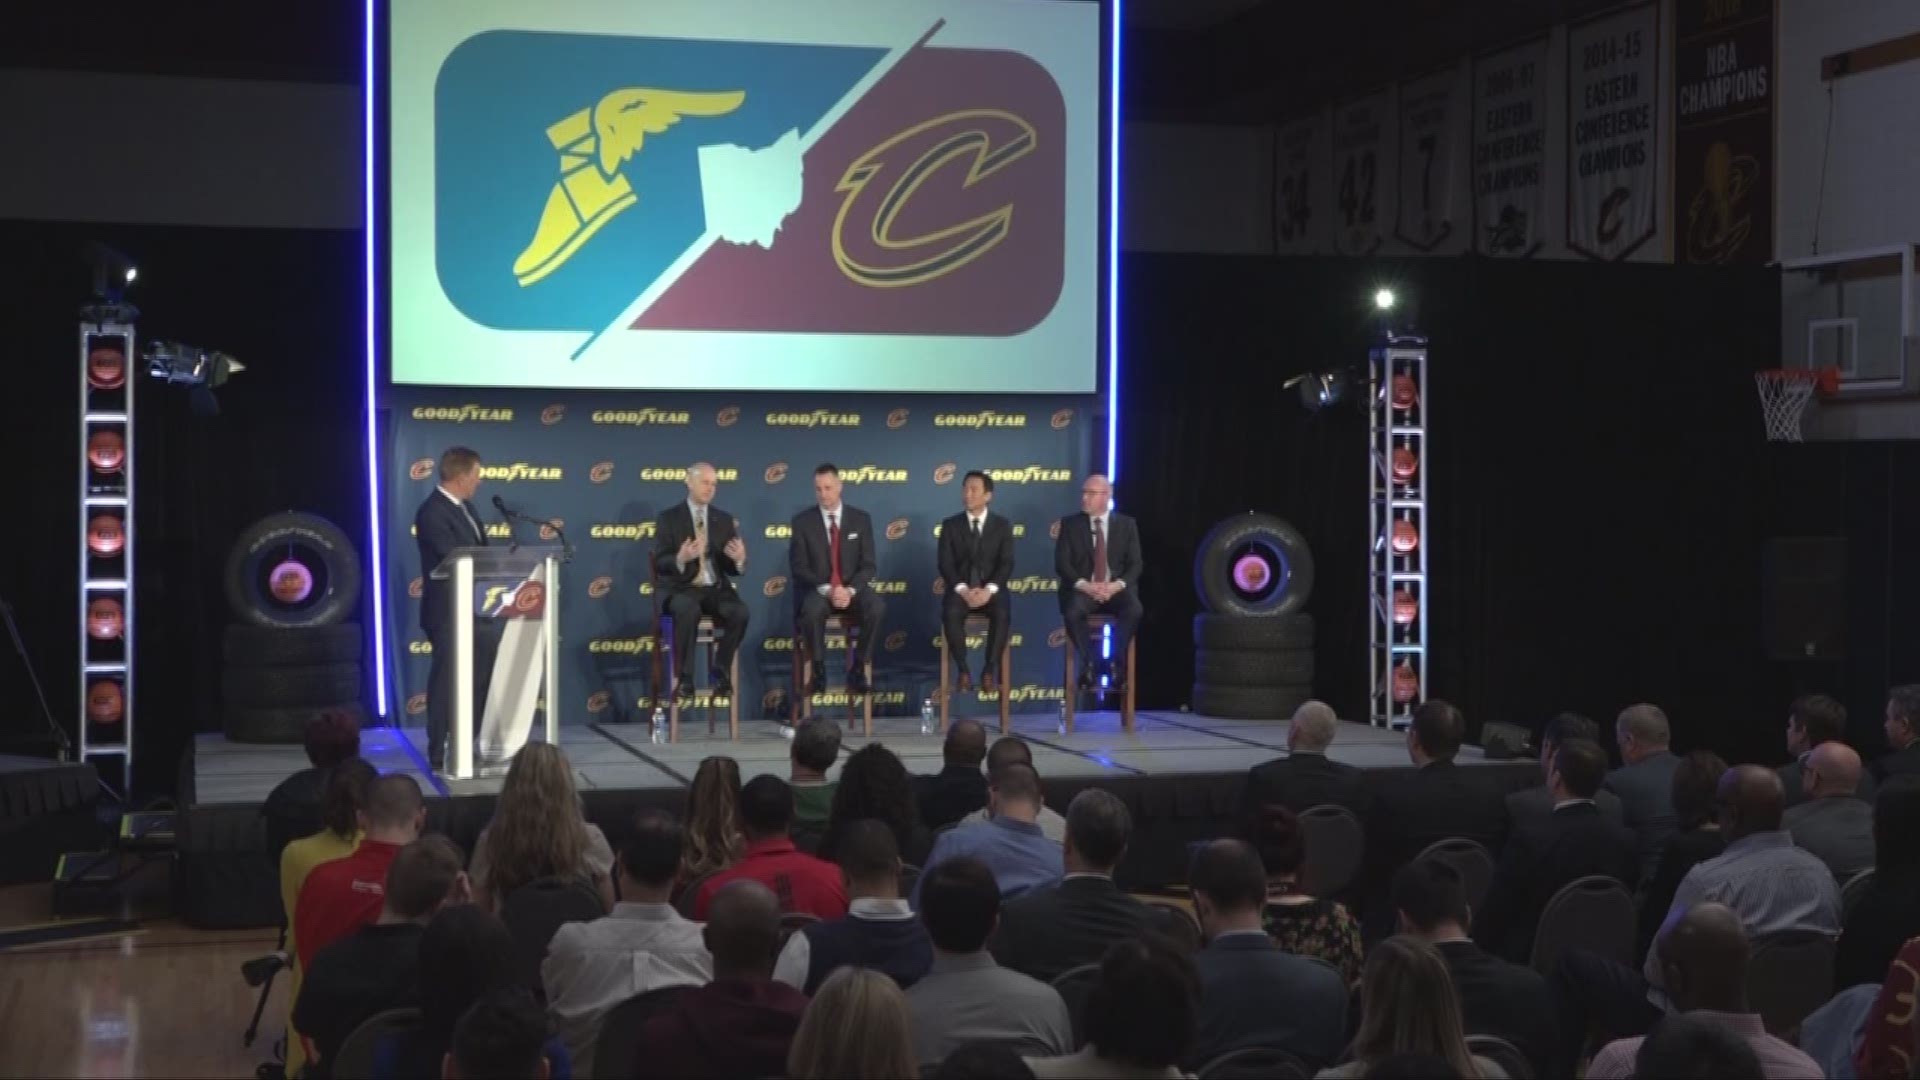 The Cavs Announce A Jersey Ad Partnership With Goodyear